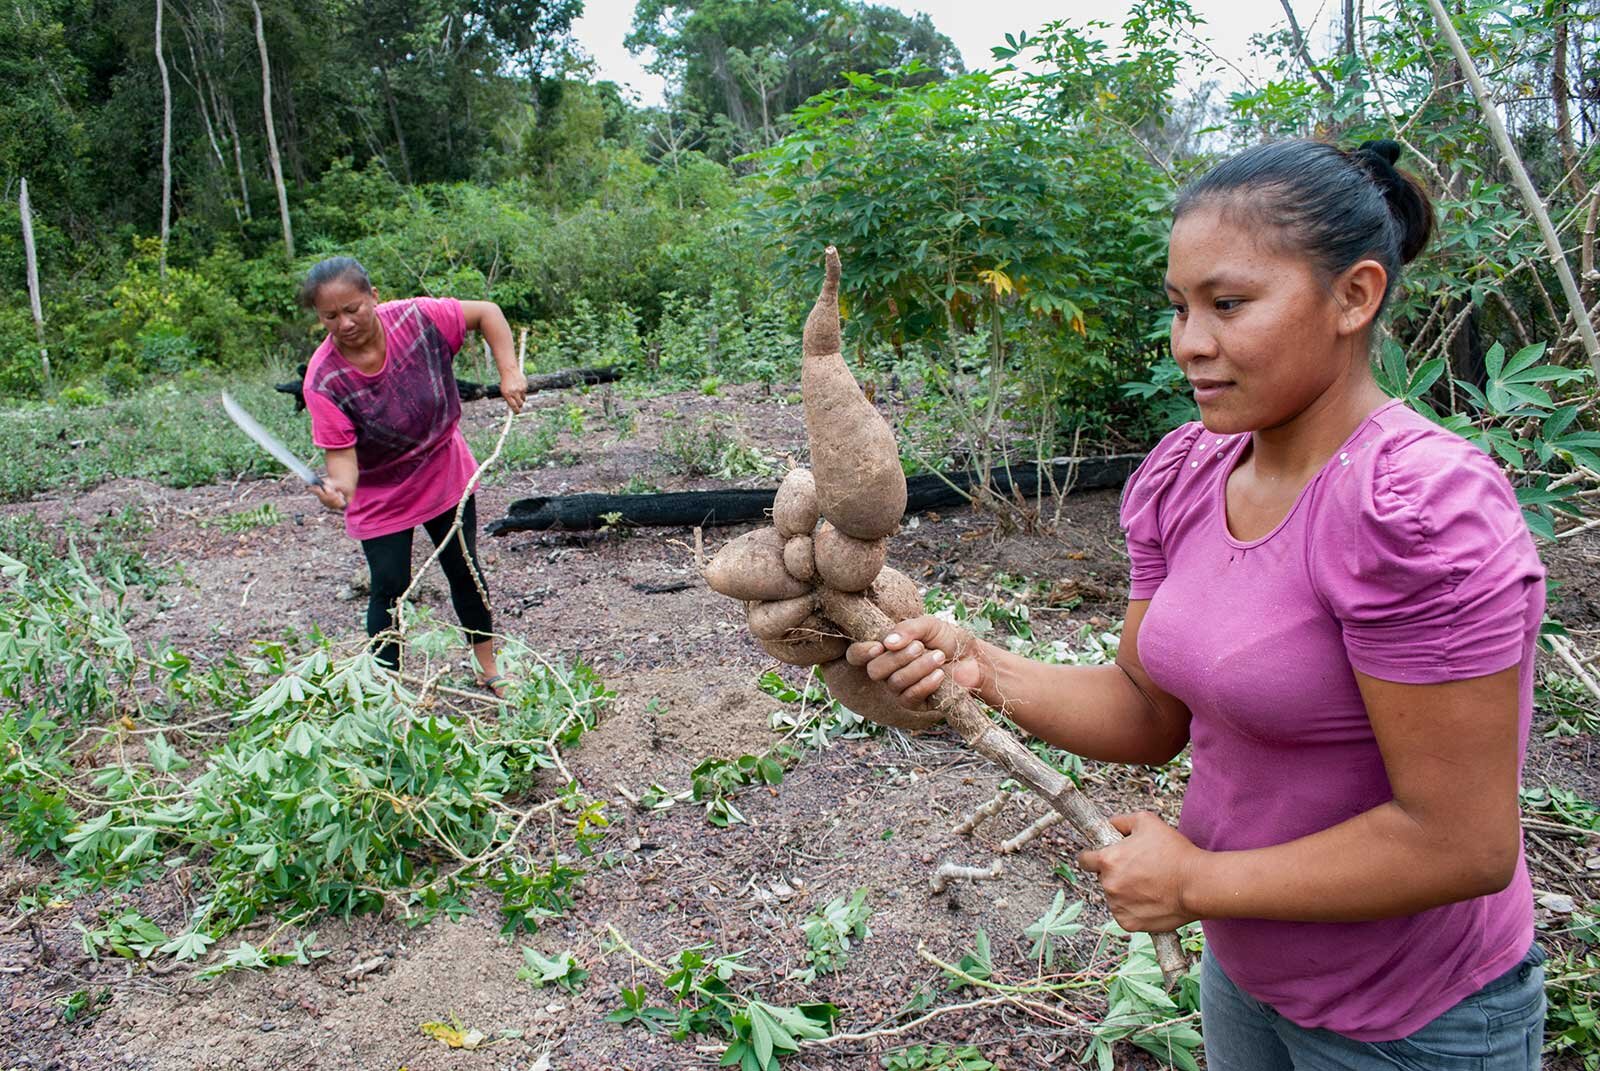  The manioc plantation is a short walk outside Yupukari village. The women are harvesting about 100 kilos of the root vegetable to show us the process of making black tucupi. It’s a staple part of their diet, though less so now than it used to be as 